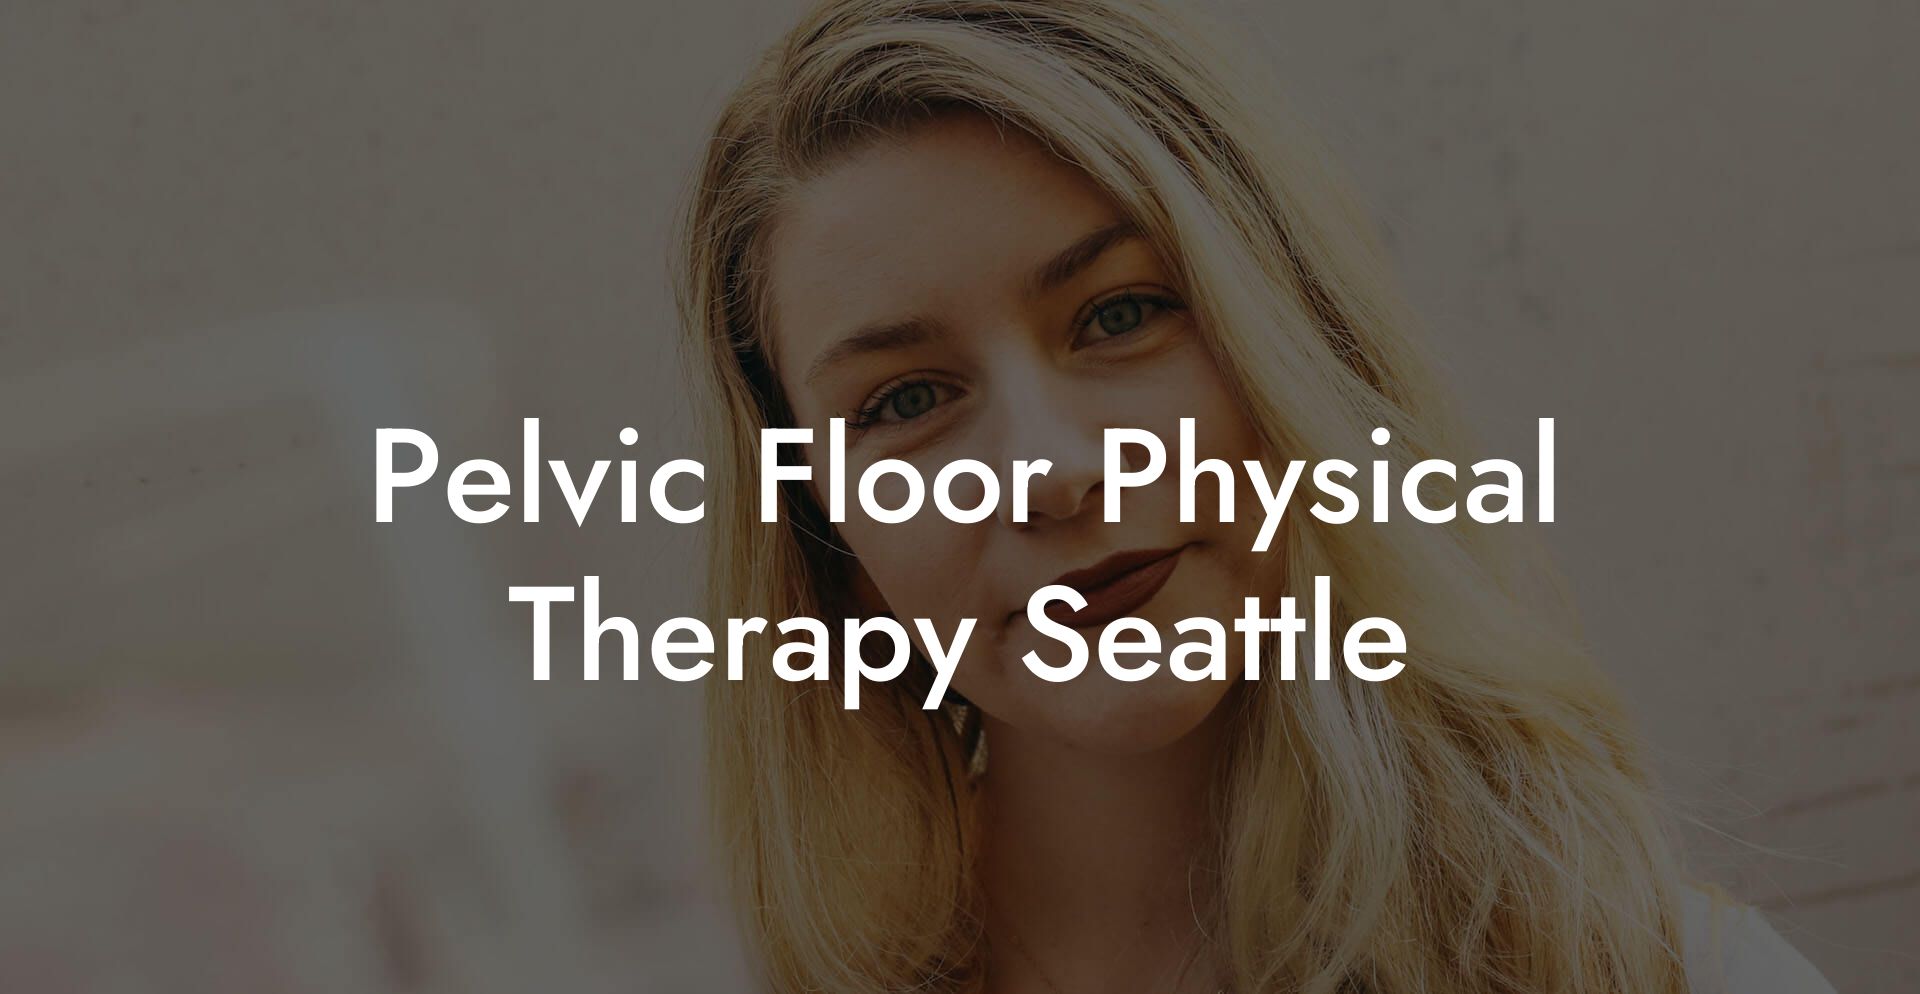 Pelvic Floor Physical Therapy Seattle